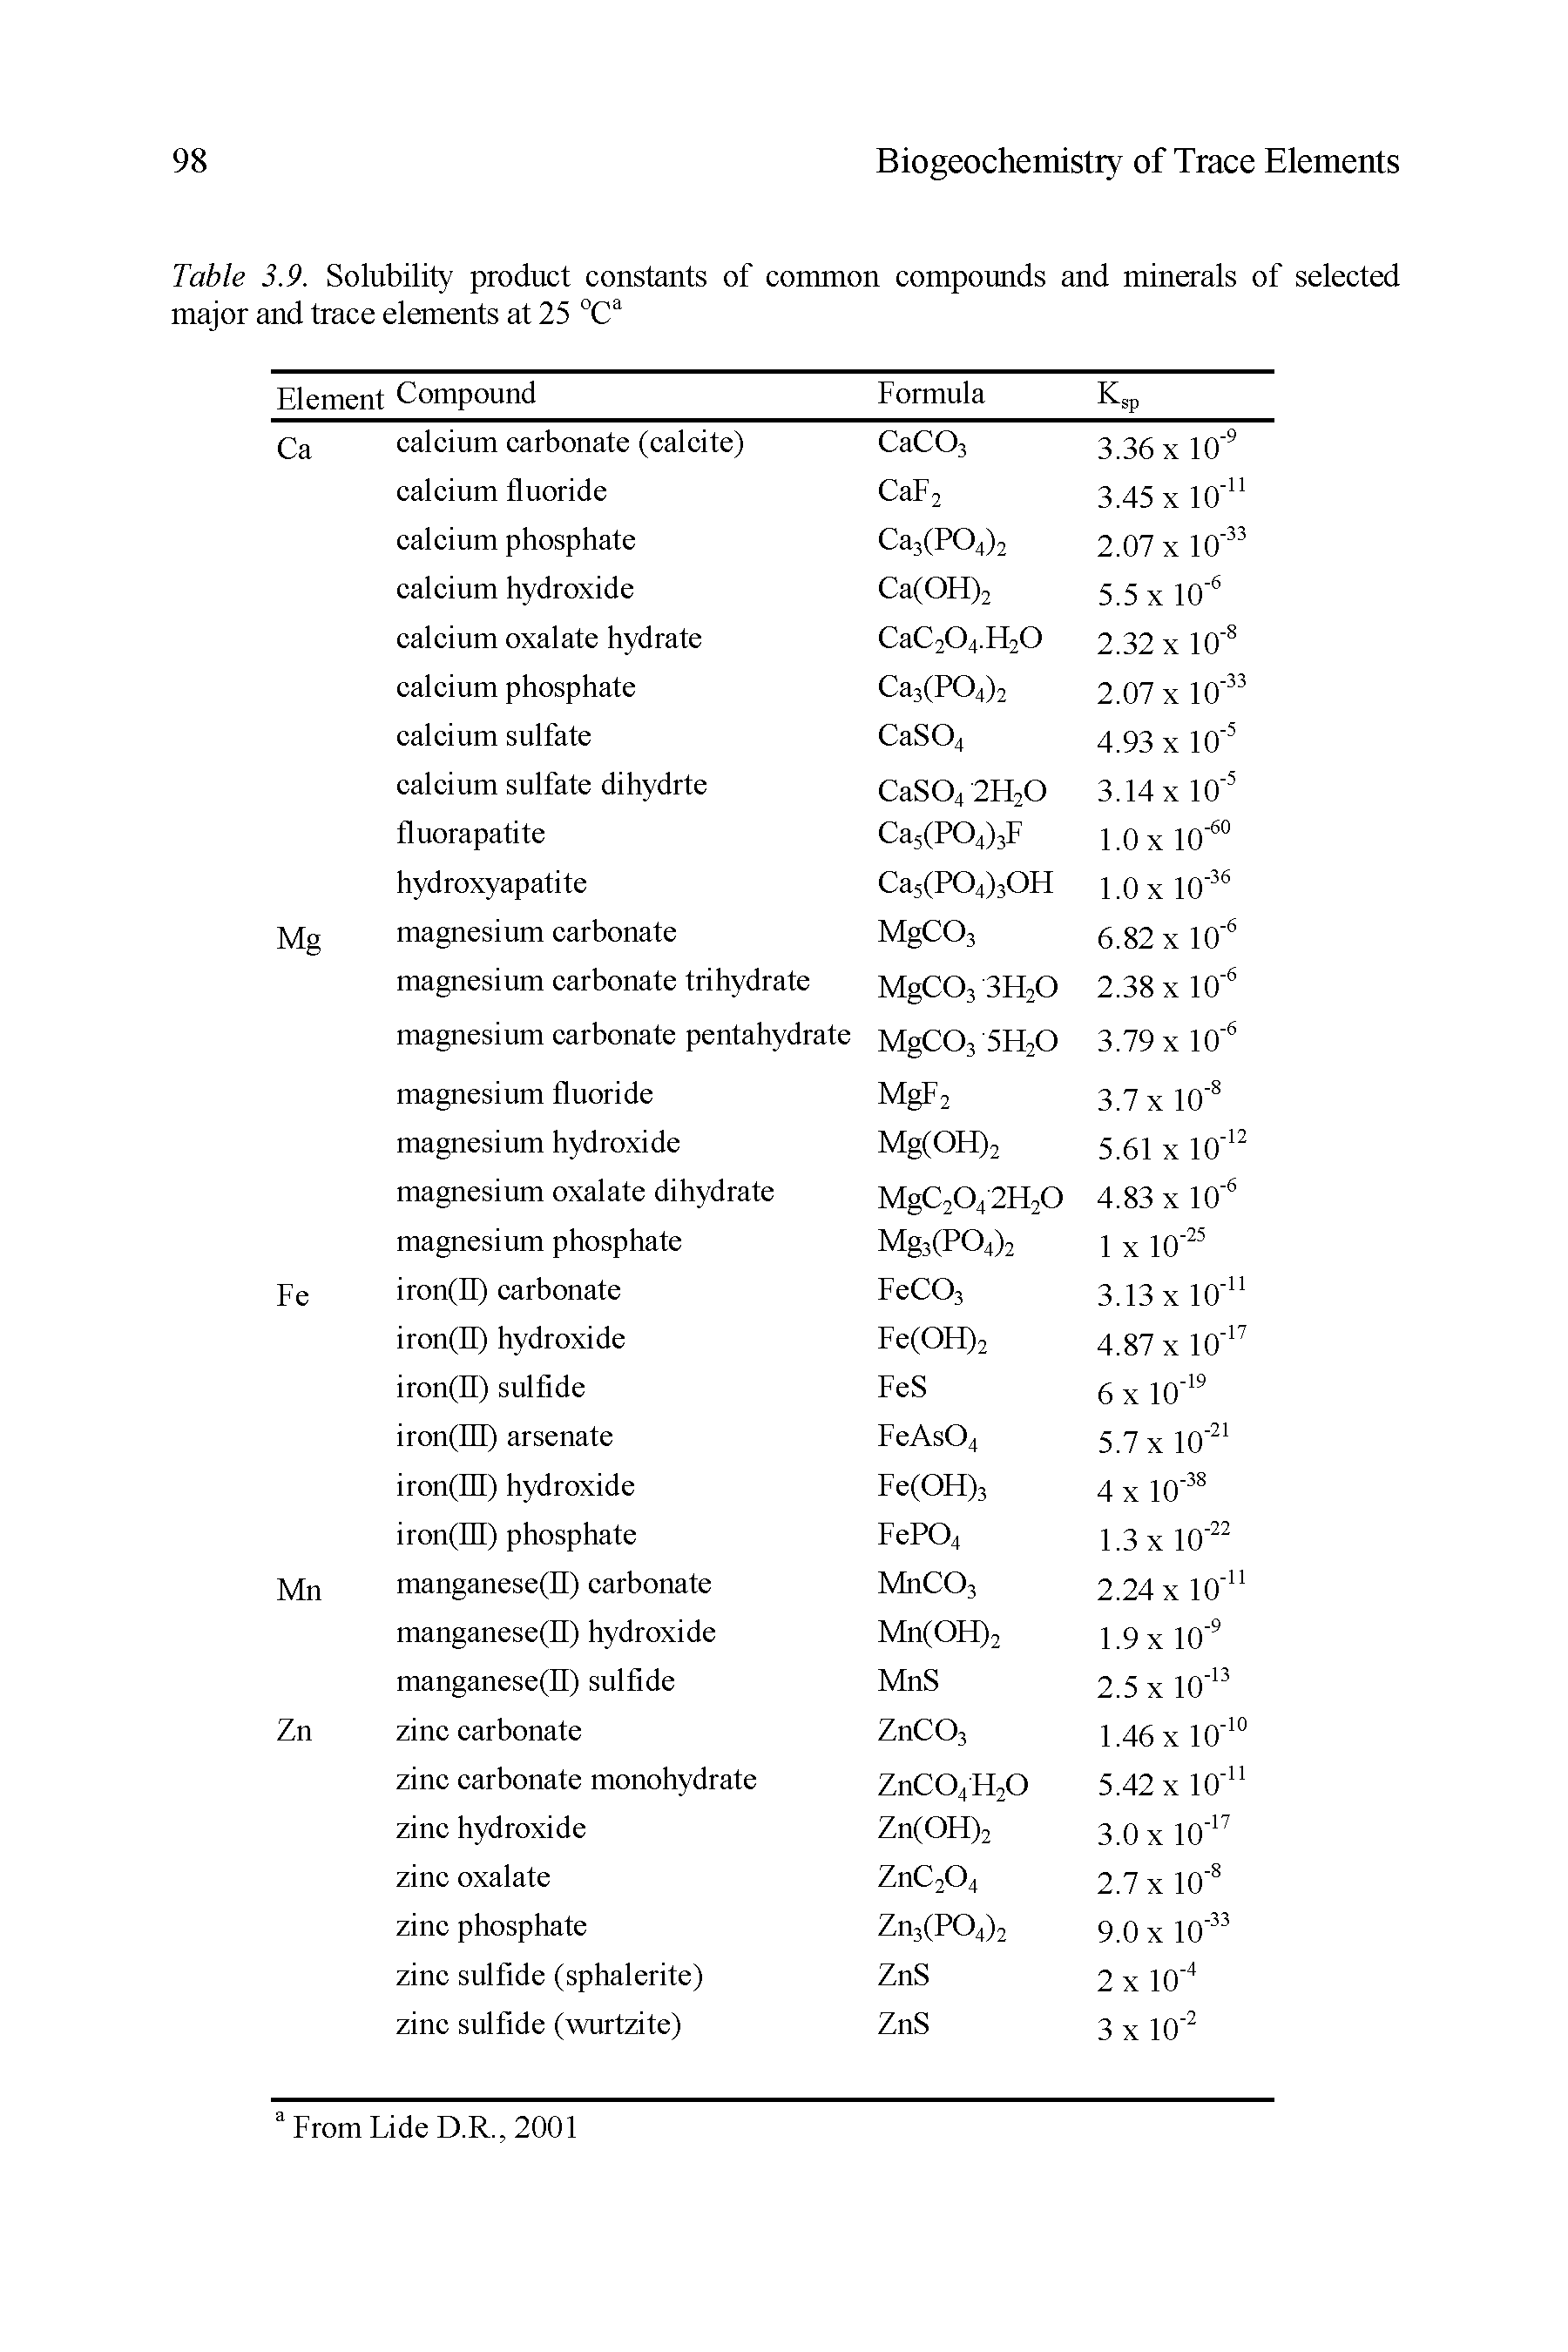 Table 3.9. Solubility product constants of common compounds and minerals of selected major and trace elements at 25 °Ca...